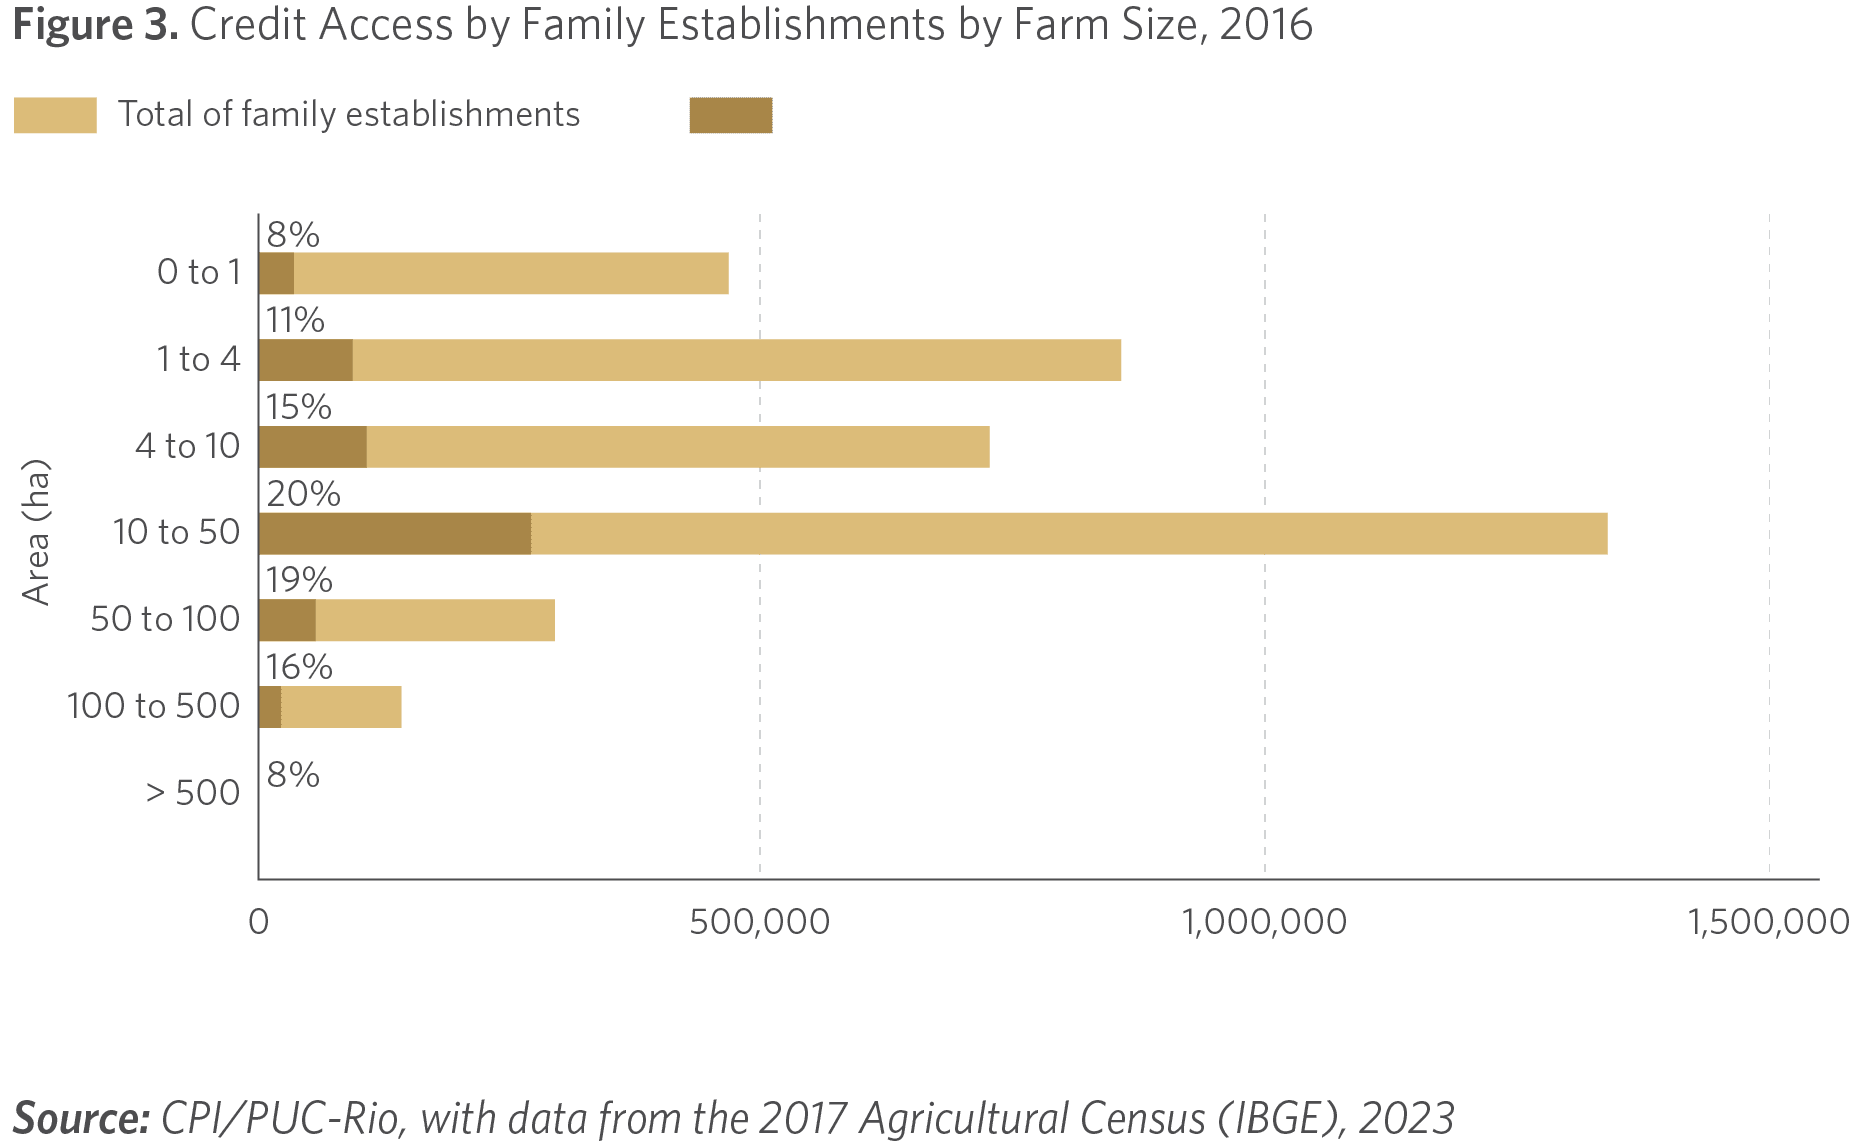 Family Farming in Brazil: Inequalities in Credit Access - CPI